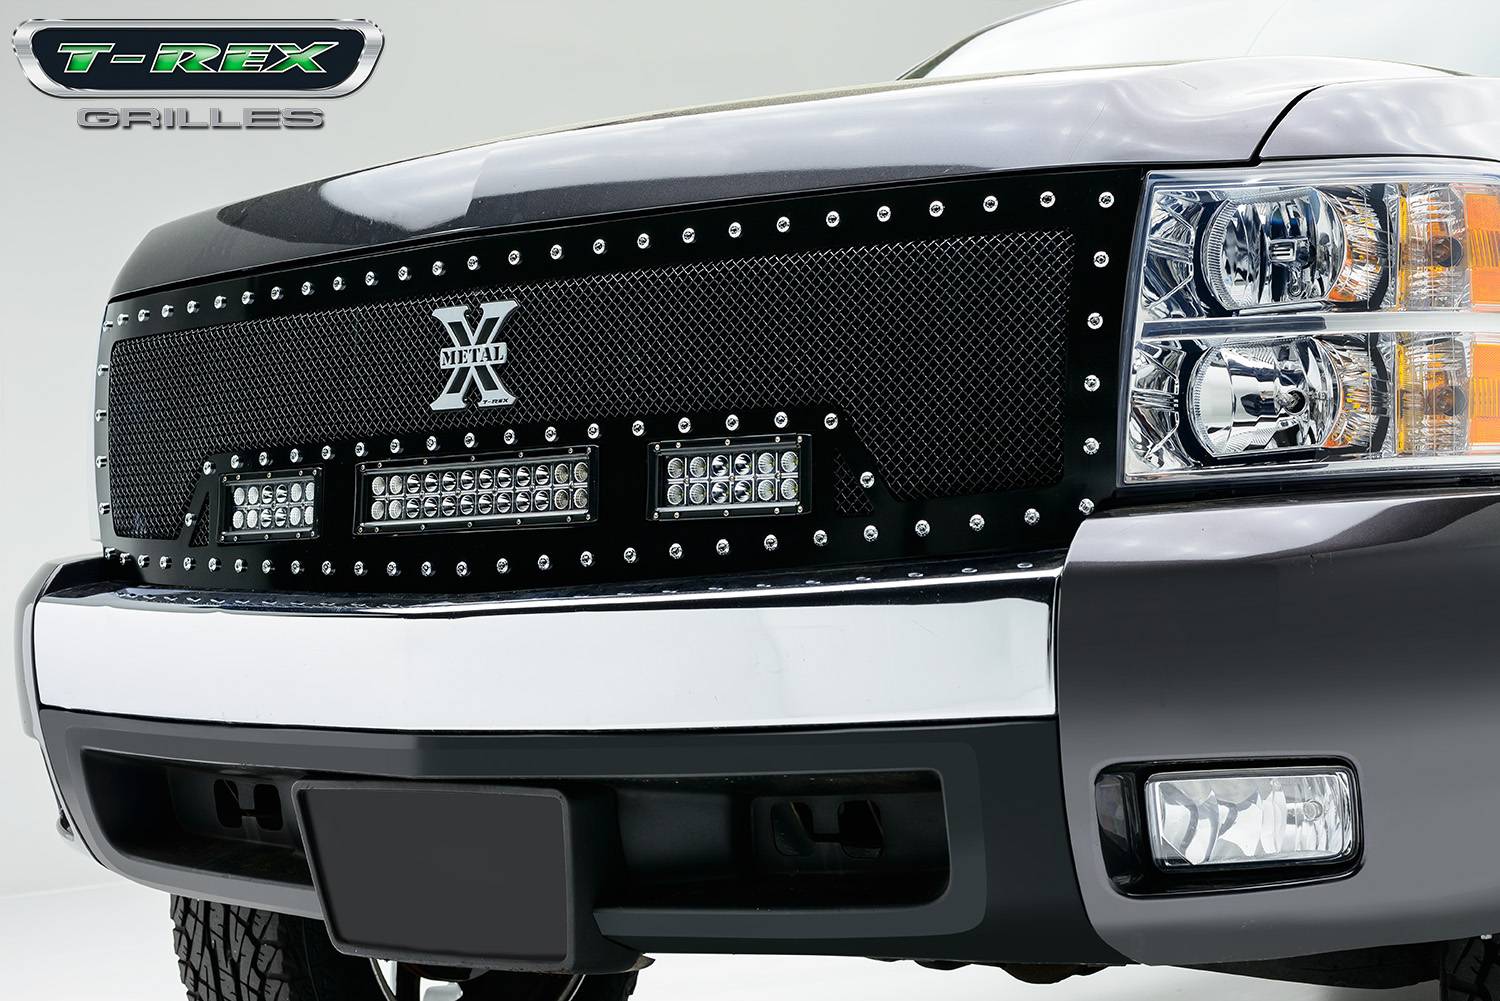 Chevrolet Silverado 1500 TORCH Series LED Light Grille 2 - 6" and 1 - 12" LED Bar For off-road 2008 Chevy Silverado Grill With Light Bar